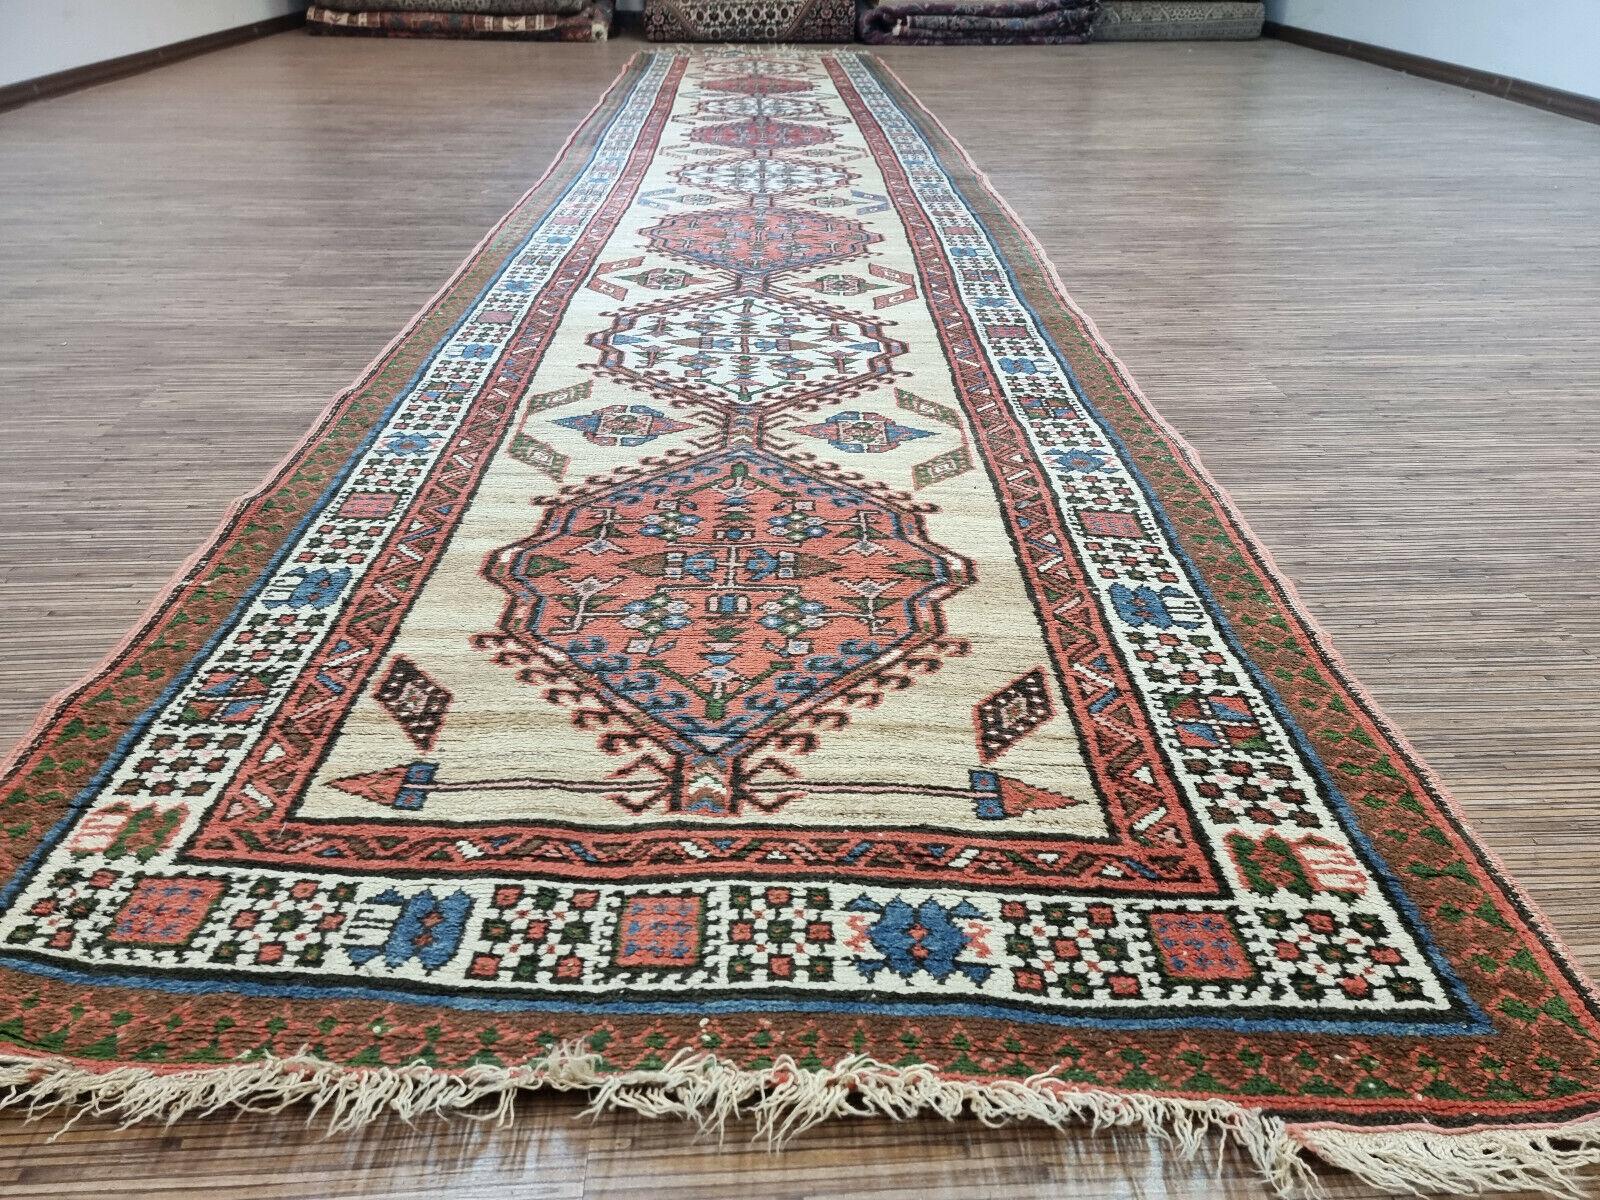 Hand-Knotted Handmade Antique Persian Style Serab Runner Rug 3.2' x 14.9', 1900s - 1D101 For Sale